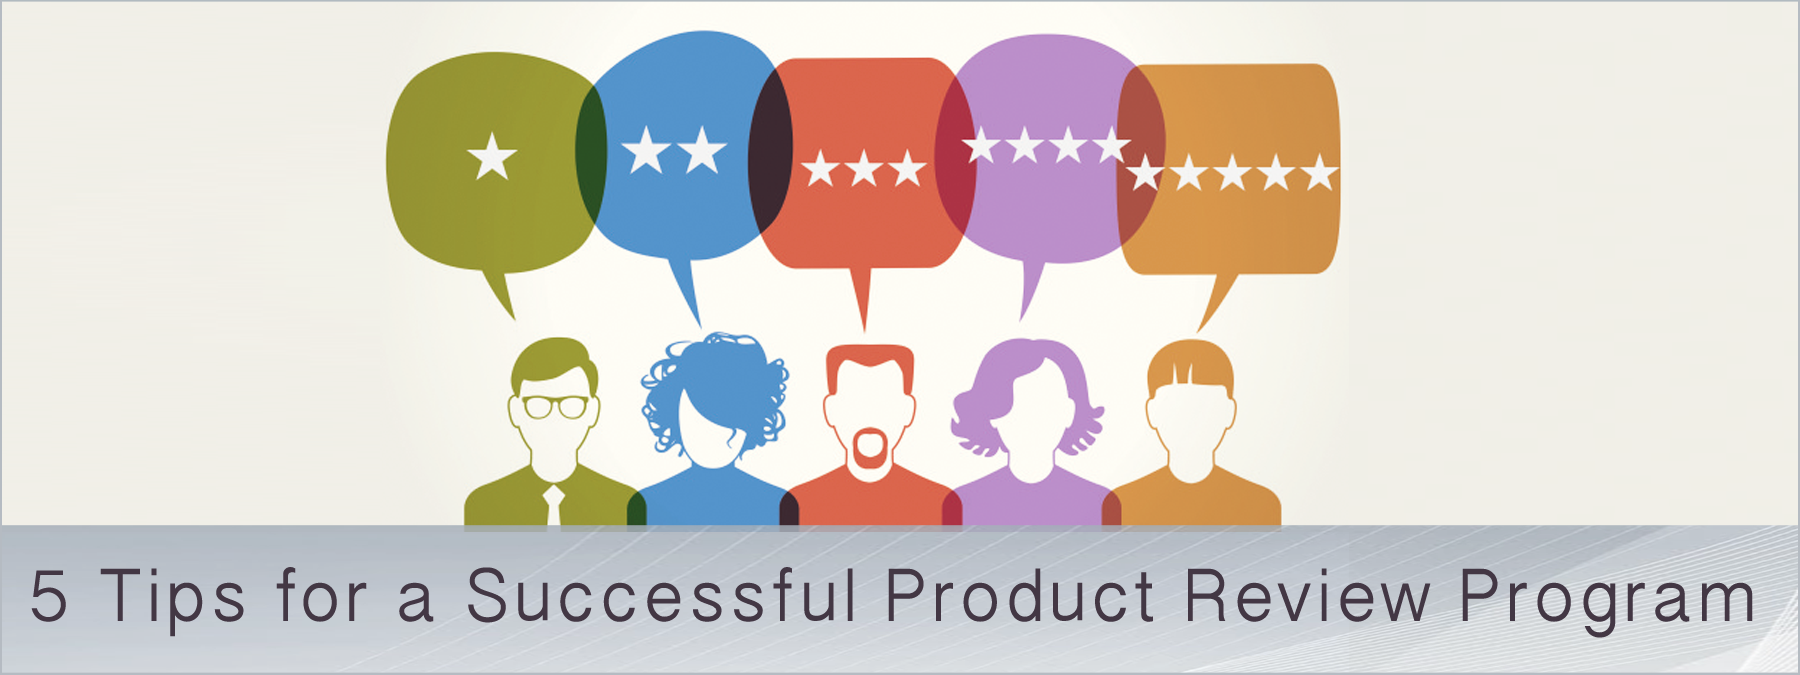 5 Tips for a Successful Product Review Program